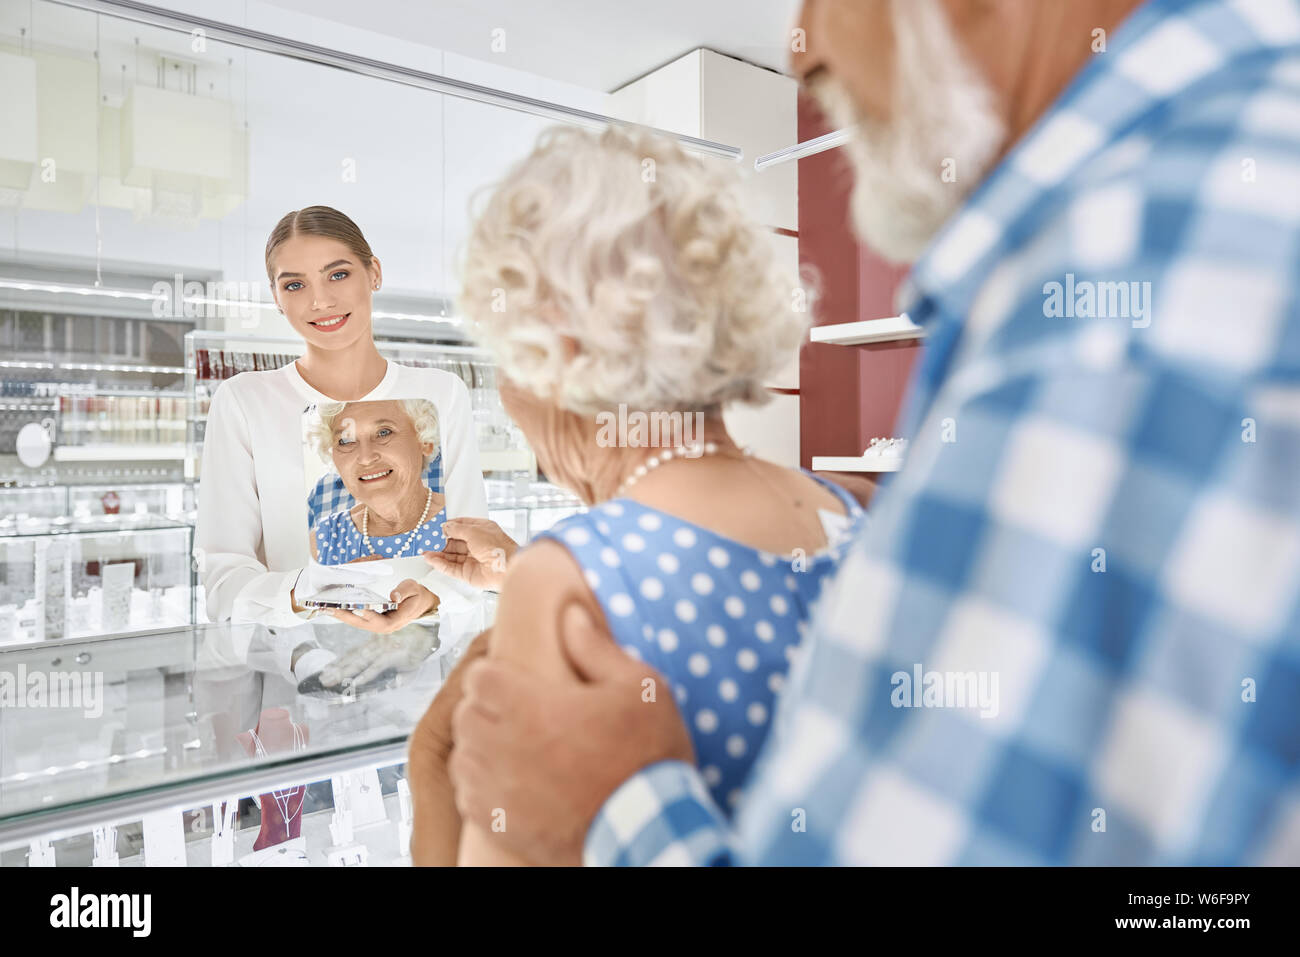 Pretty mature lady in polka dot dress trying on pearl necklace and looking at mirror that keeping attractive smiling female seller. Happy aged wife getting present from her husband at jewelry shop. Stock Photo